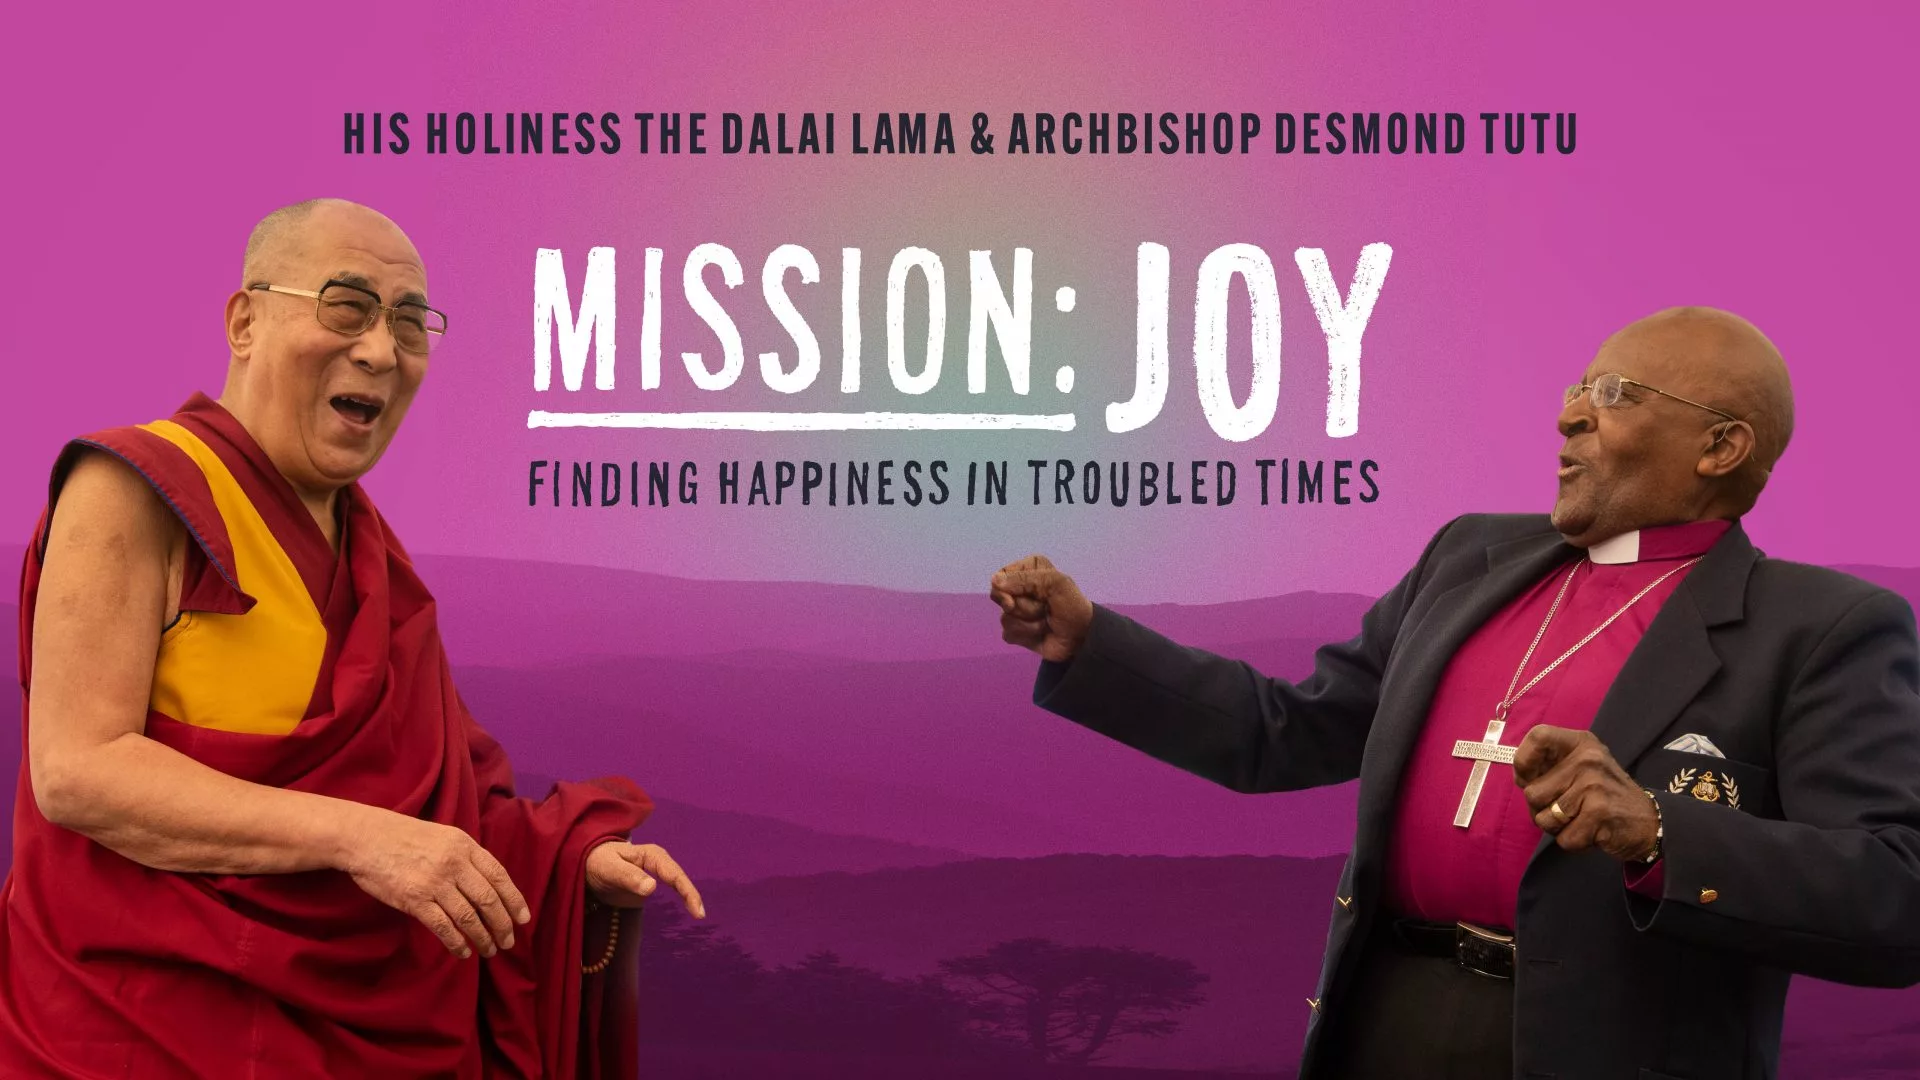 Photo of the movie cover of Mission: Joy with His Holiness the Dalai Lama and Archbishop Desmond Tutu.